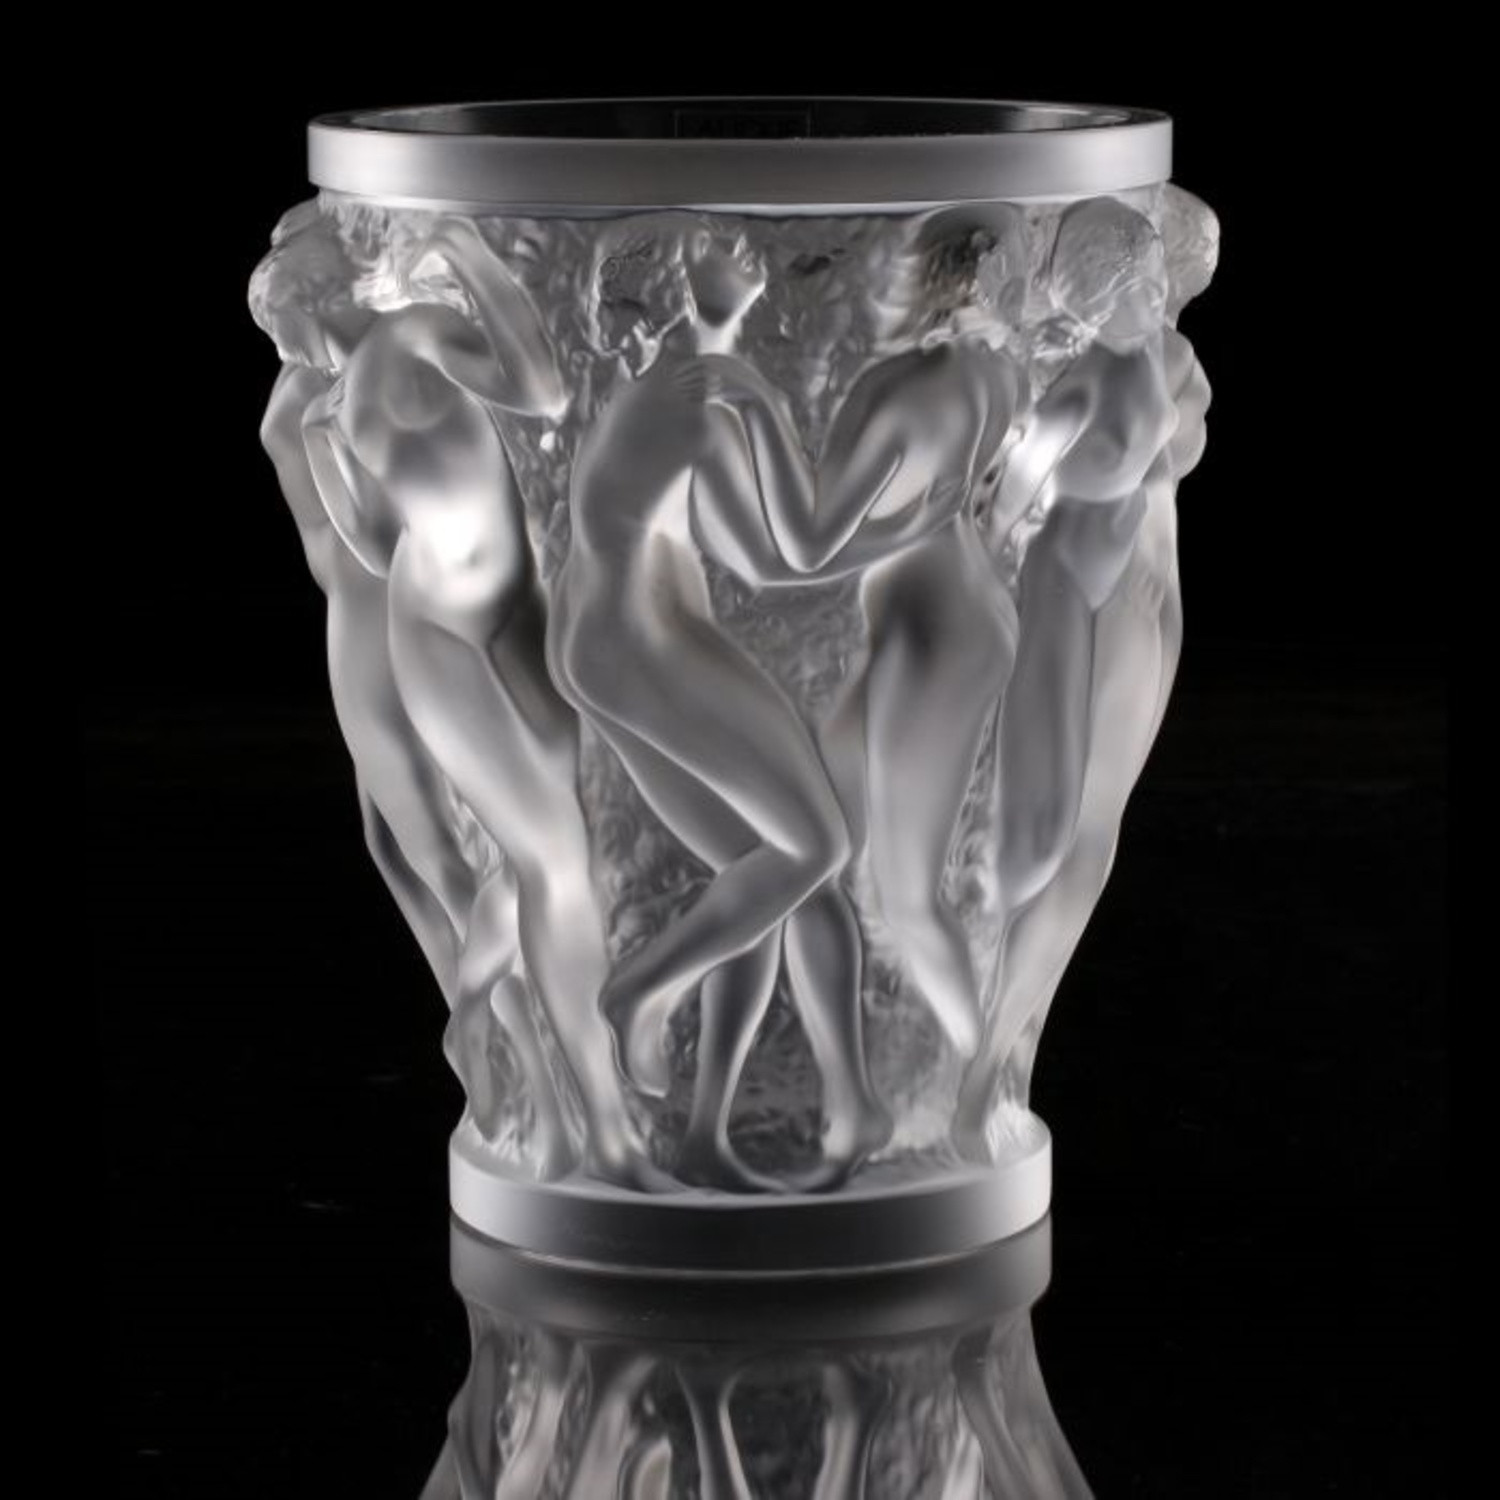 Lalique Vase Bacchantes Of Large Collections Of Lalique Modern Furniture and Cloisonna Throughout Large Collections Of Lalique Modern Furniture and Cloisonna Featured In Grays Auctioneers Artwire Press Release From Artfixdaily Com